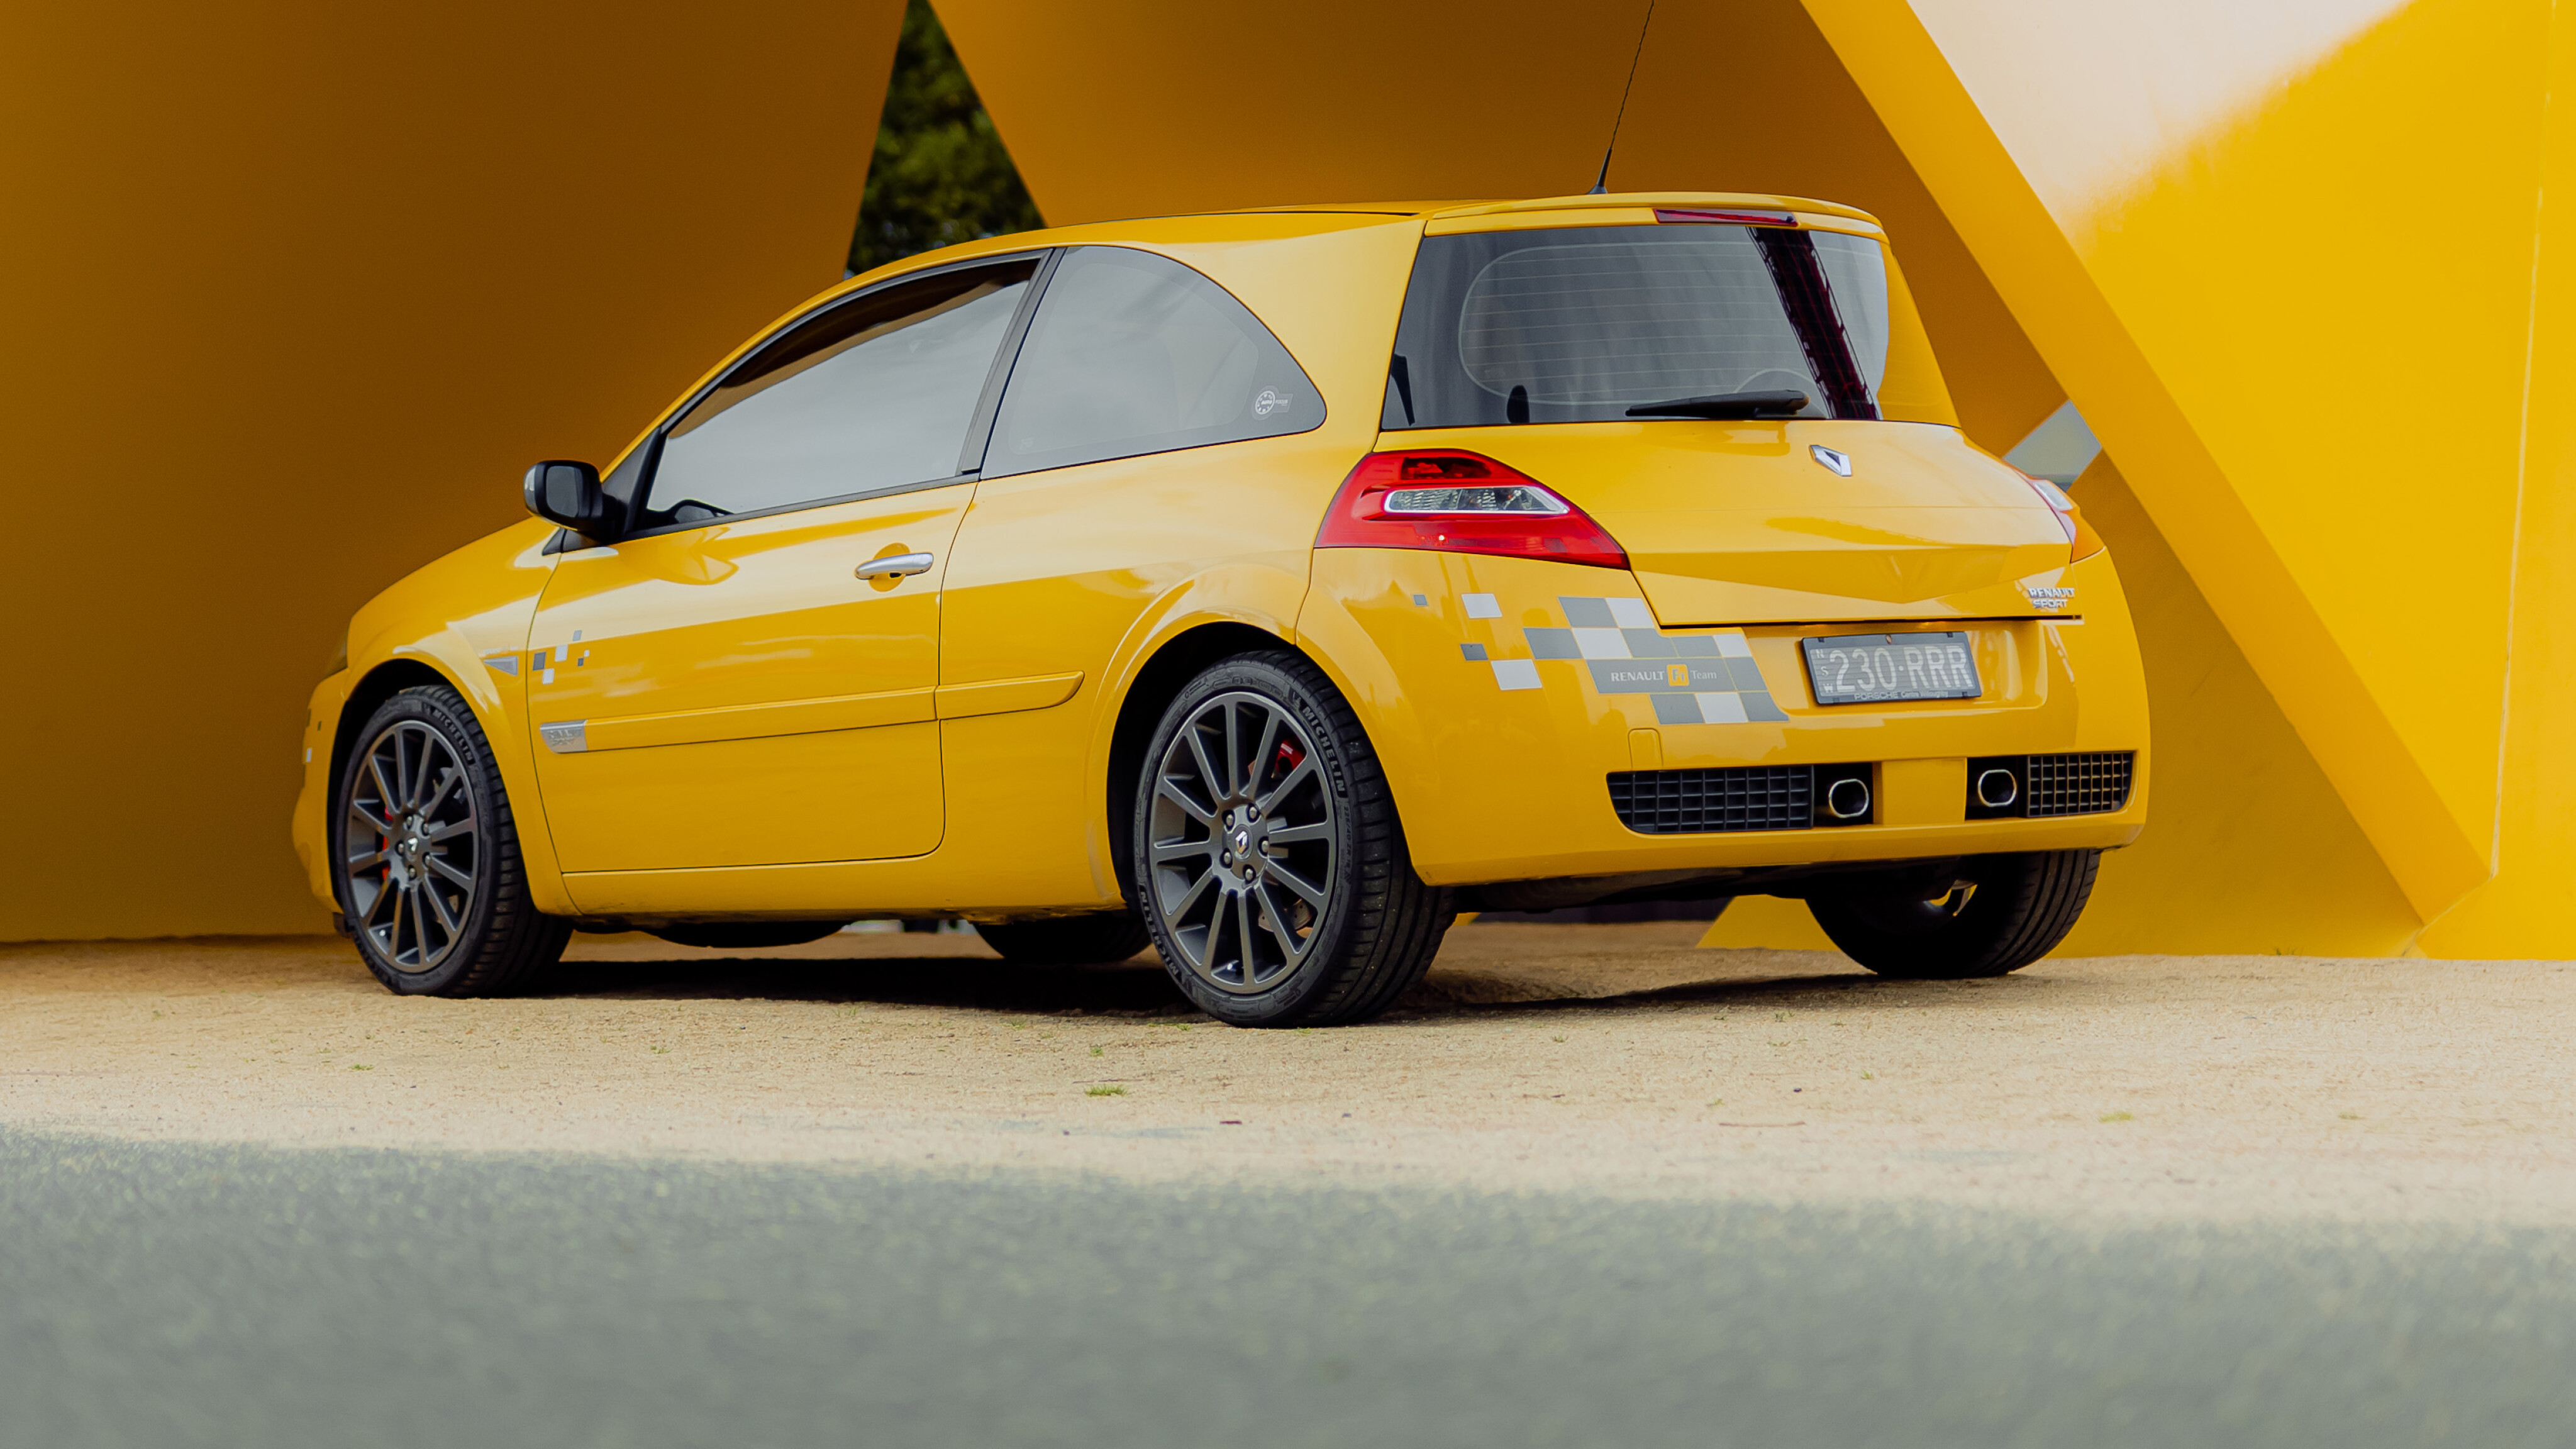 29501ce0/renaultsport megane 230 f1 team r26 coupe yellow abrook 14 jpg